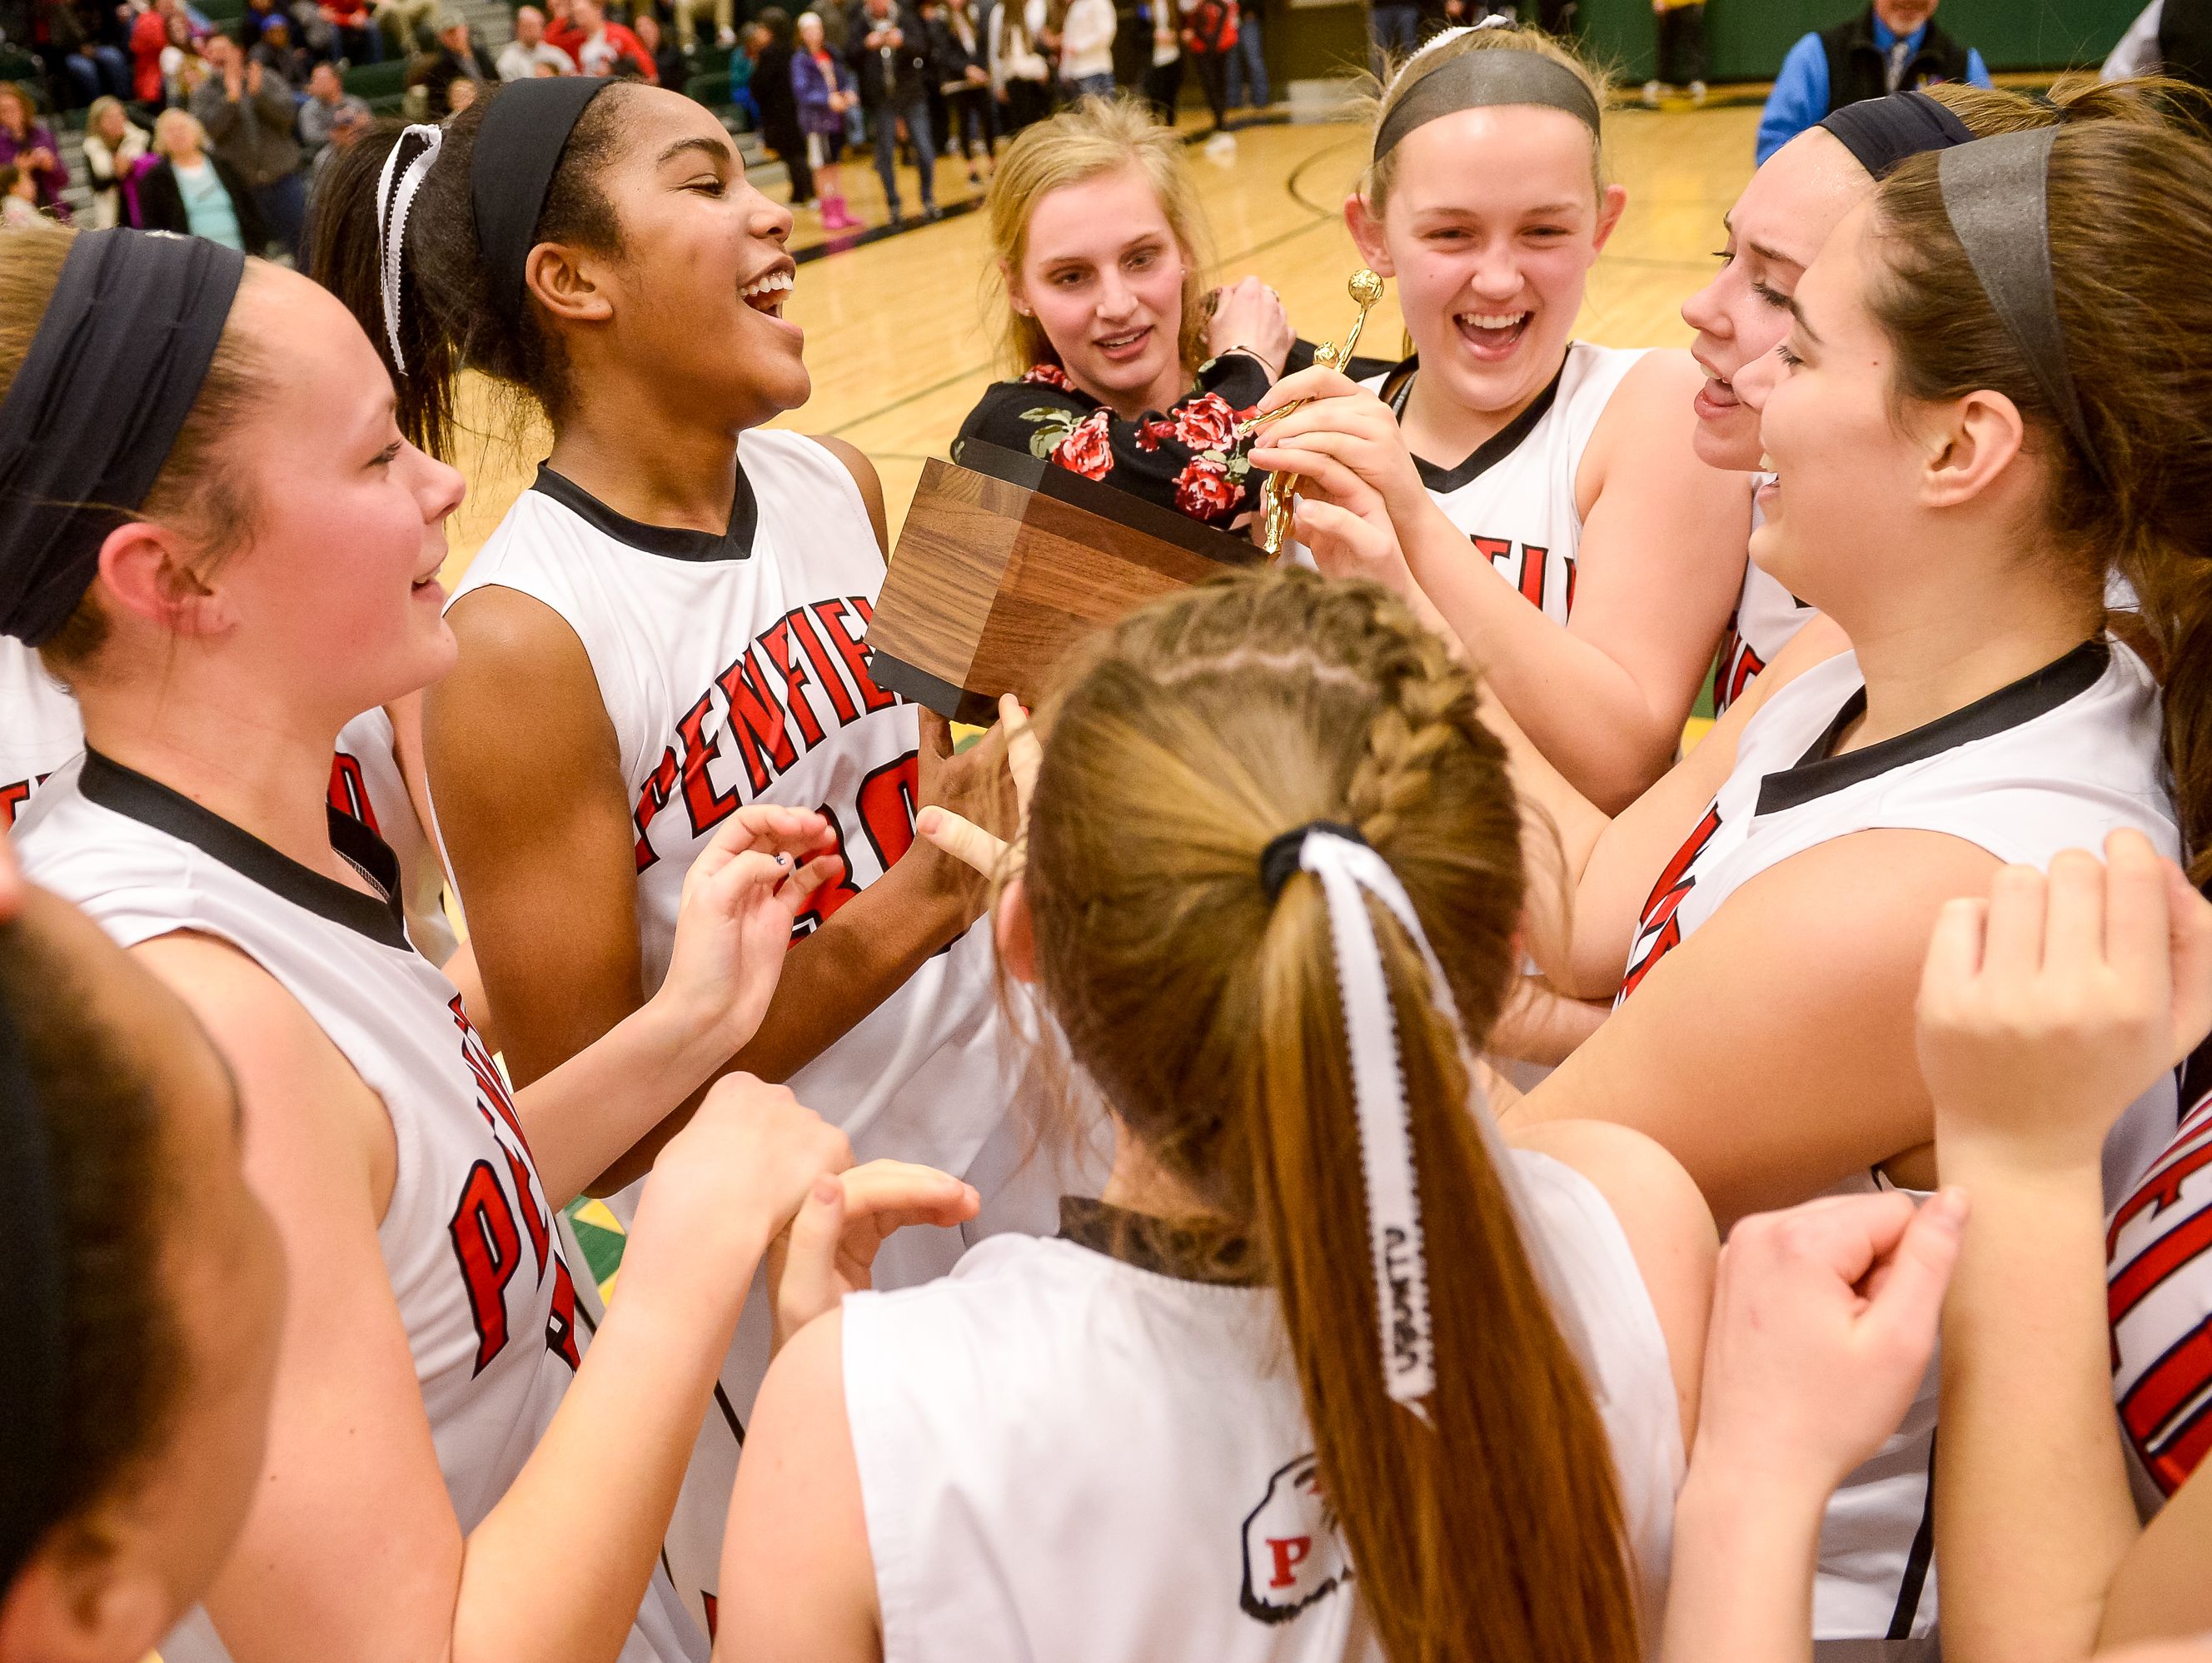 The Penfield girls basketball team celebrates after winning the Section V Class AA Championship on Feb. 27, 2016.